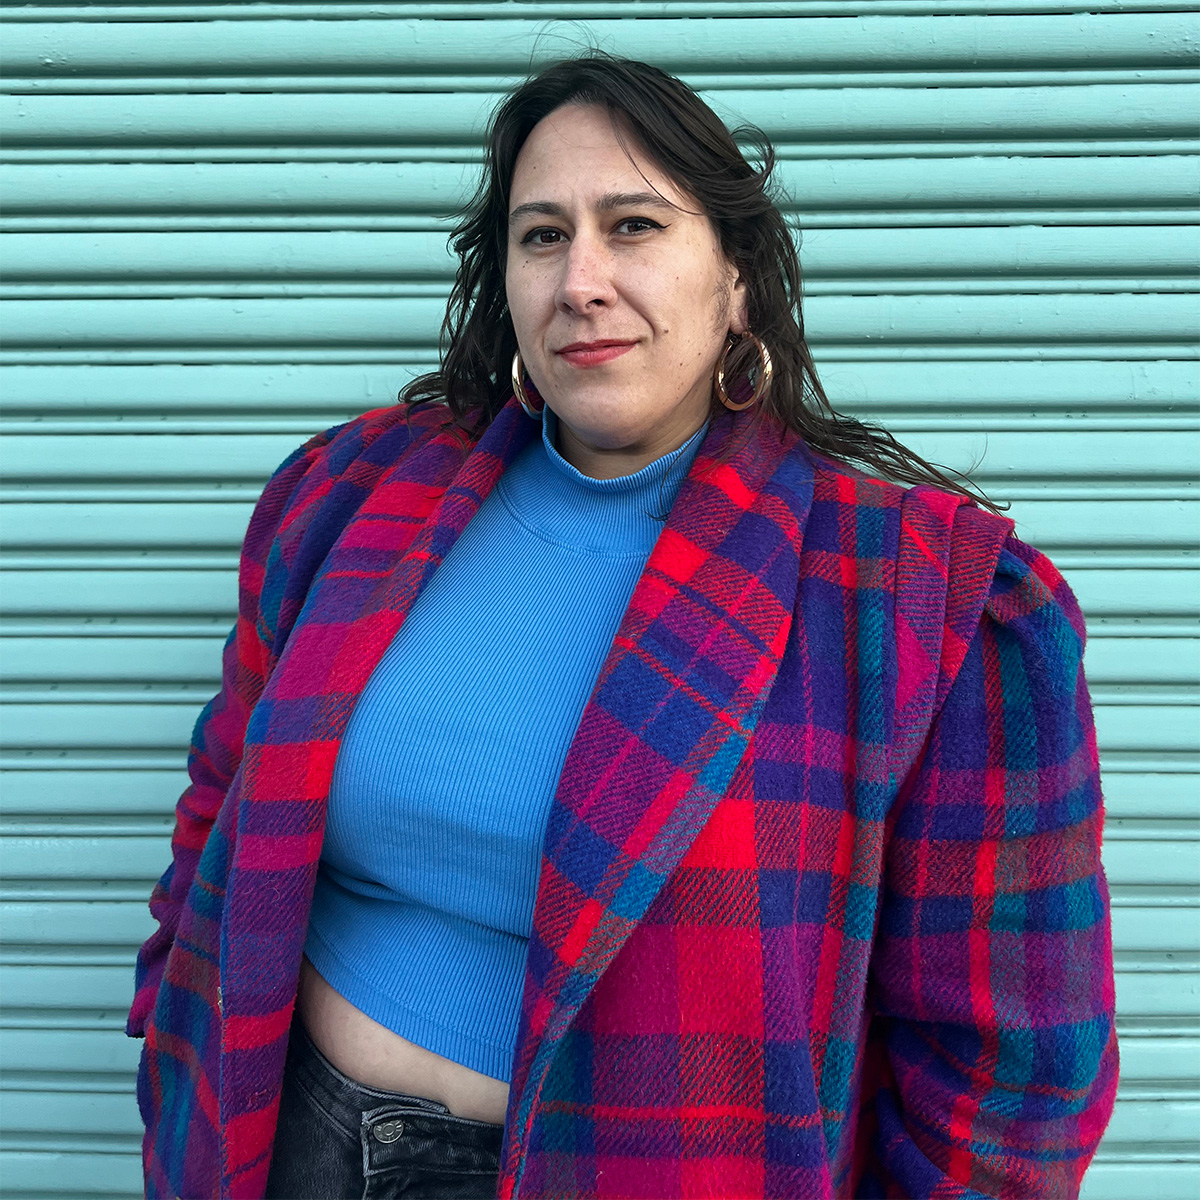 Tricia Rainwater color portrait. Tricia is a Choctaw woman standing in front of a bright teal curragated wall. She is smiling and is wearing a plaid coat, a blue mockneck cropped top, and jeans. She has straight, medium-length hair and is wearing hoop earrings.